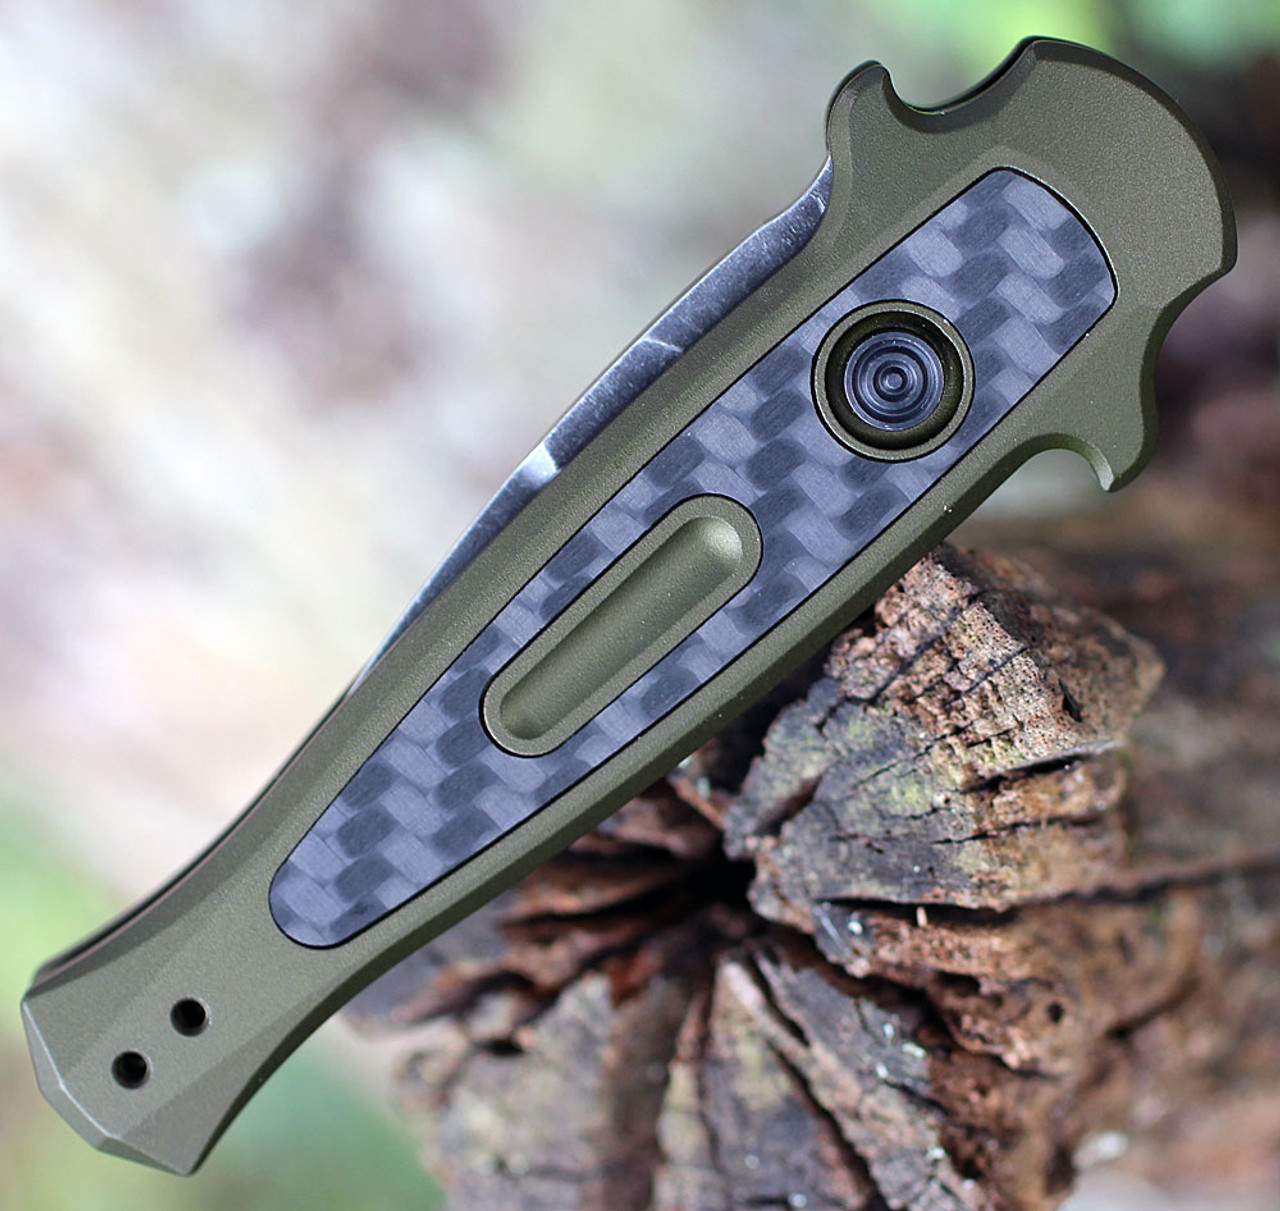 Kershaw Launch 12 CA Legal Automatic Knife (7130OLBW)- 1.90" Blackwashed CPM-154 Spear Point Blade, OD Green Aluminum w/ Carbon Fiber Inlay